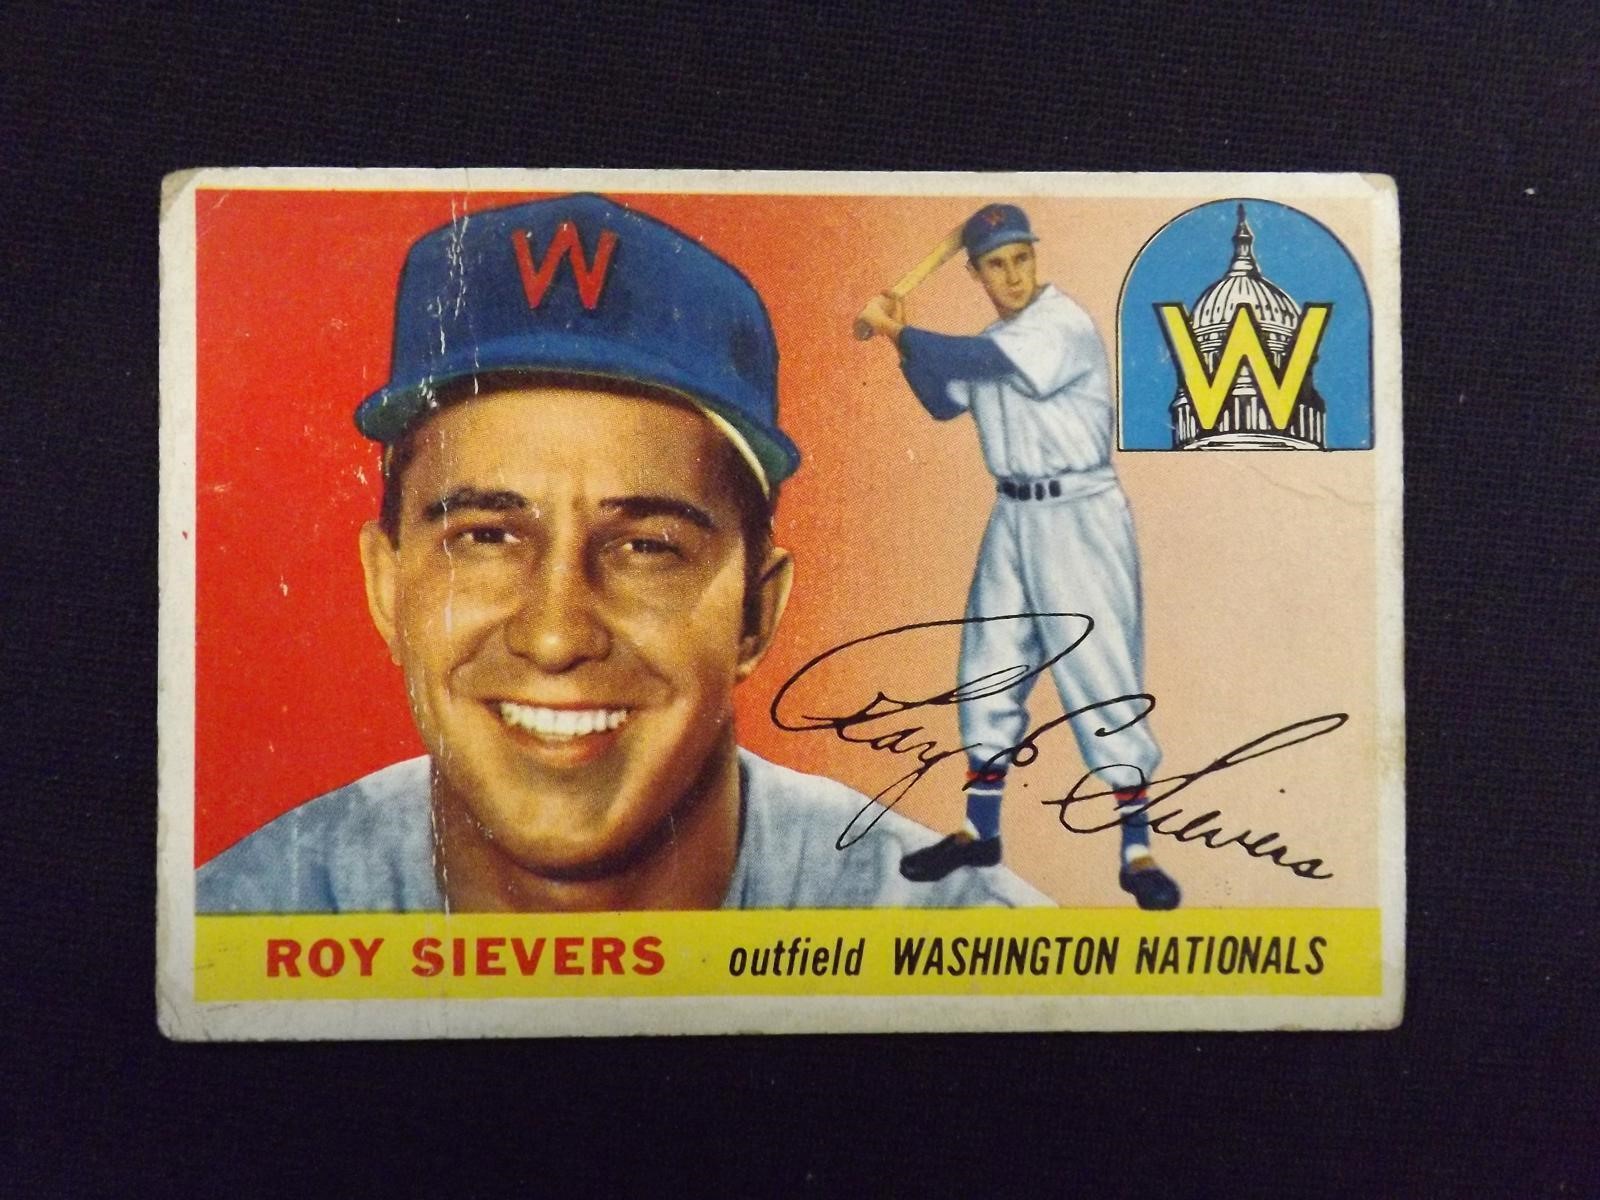 1955 TOPPS #16 ROY SIEVERS NATIONALS